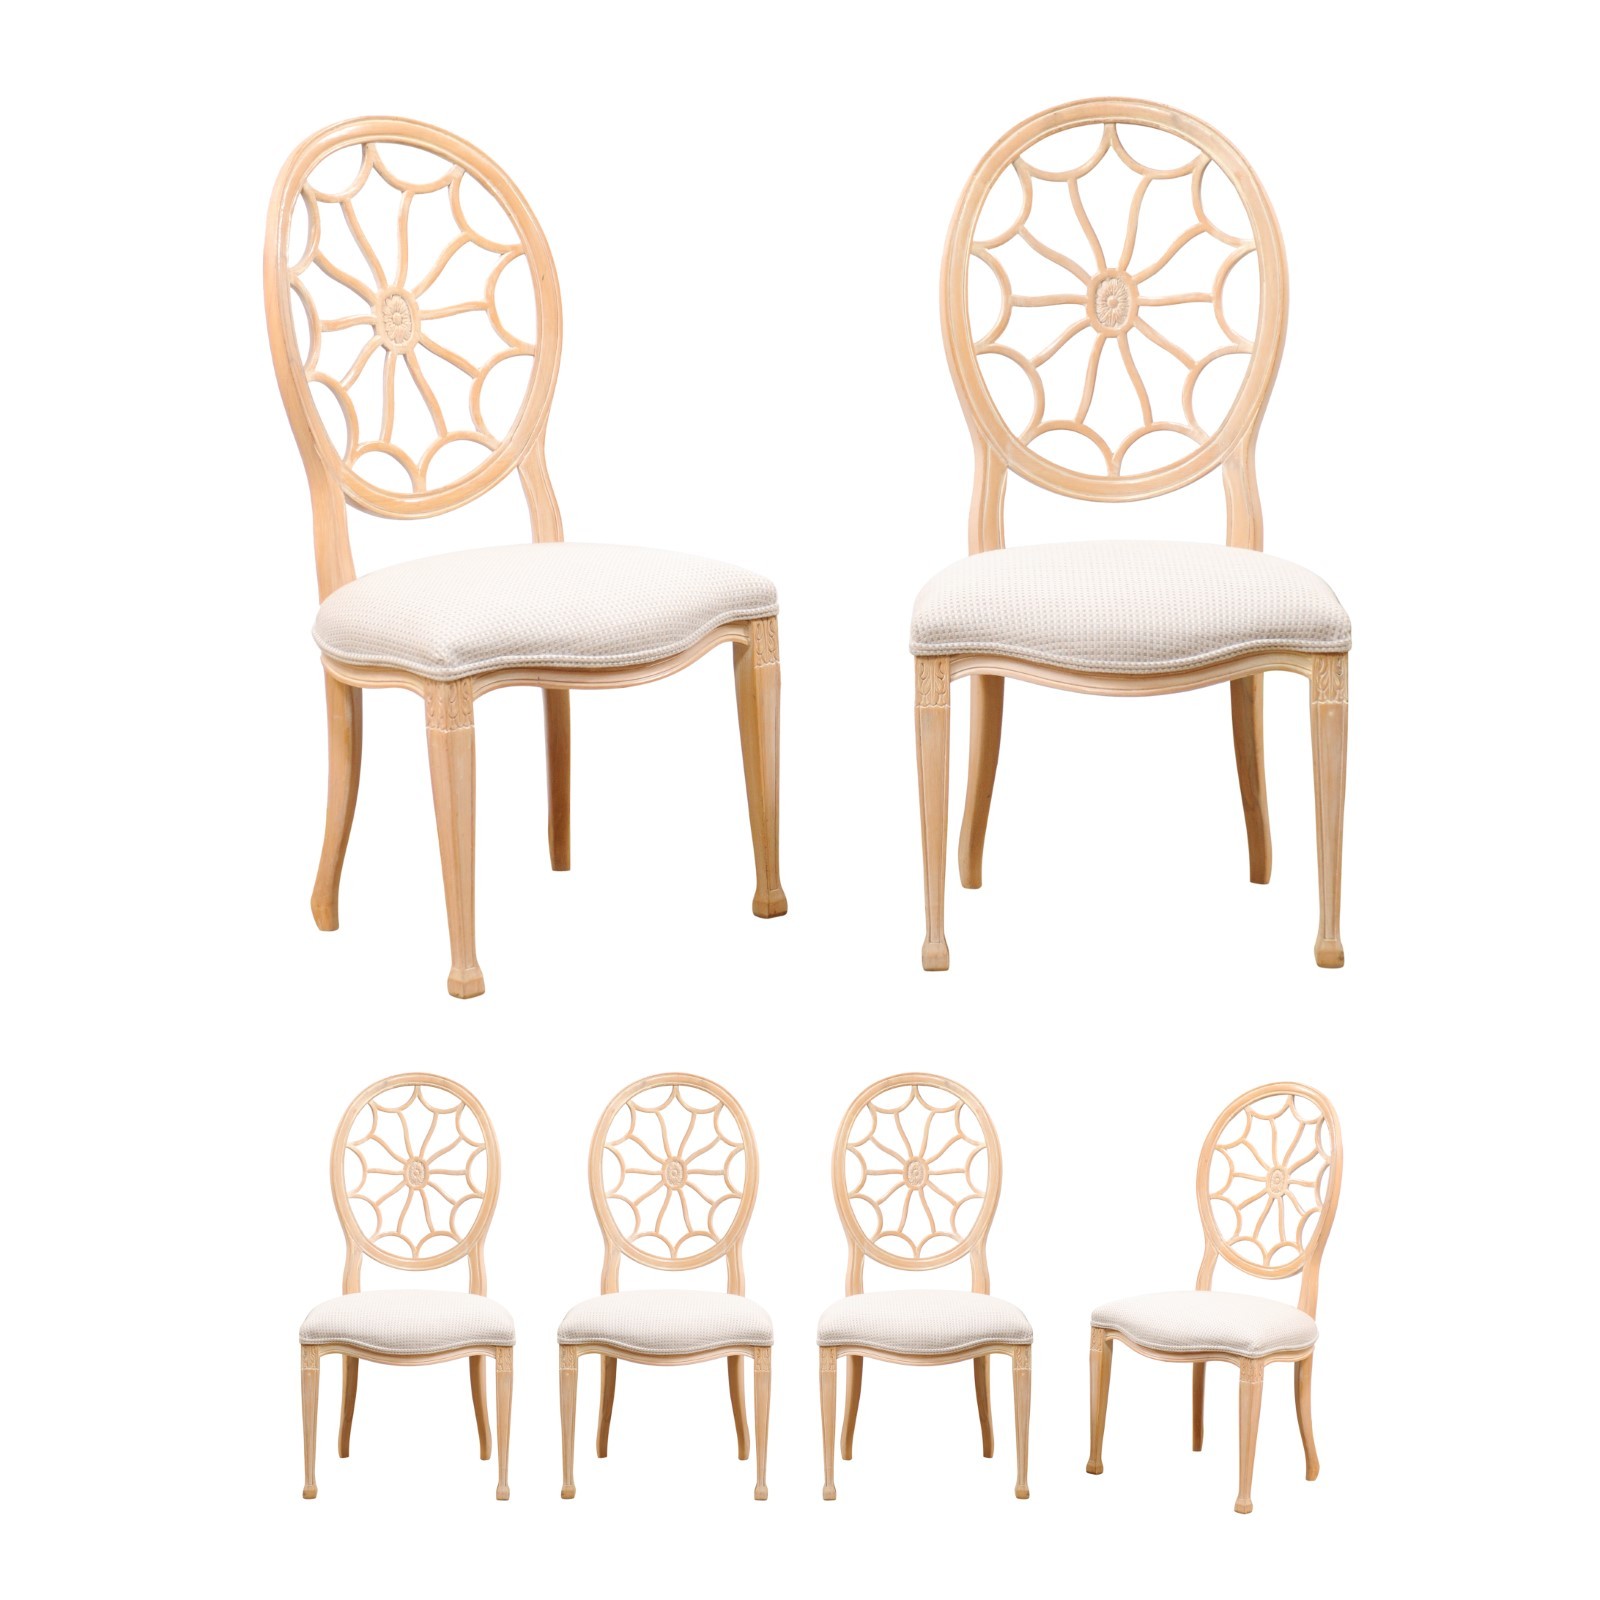 Six Side Chairs Oval Backs in Floral Motif